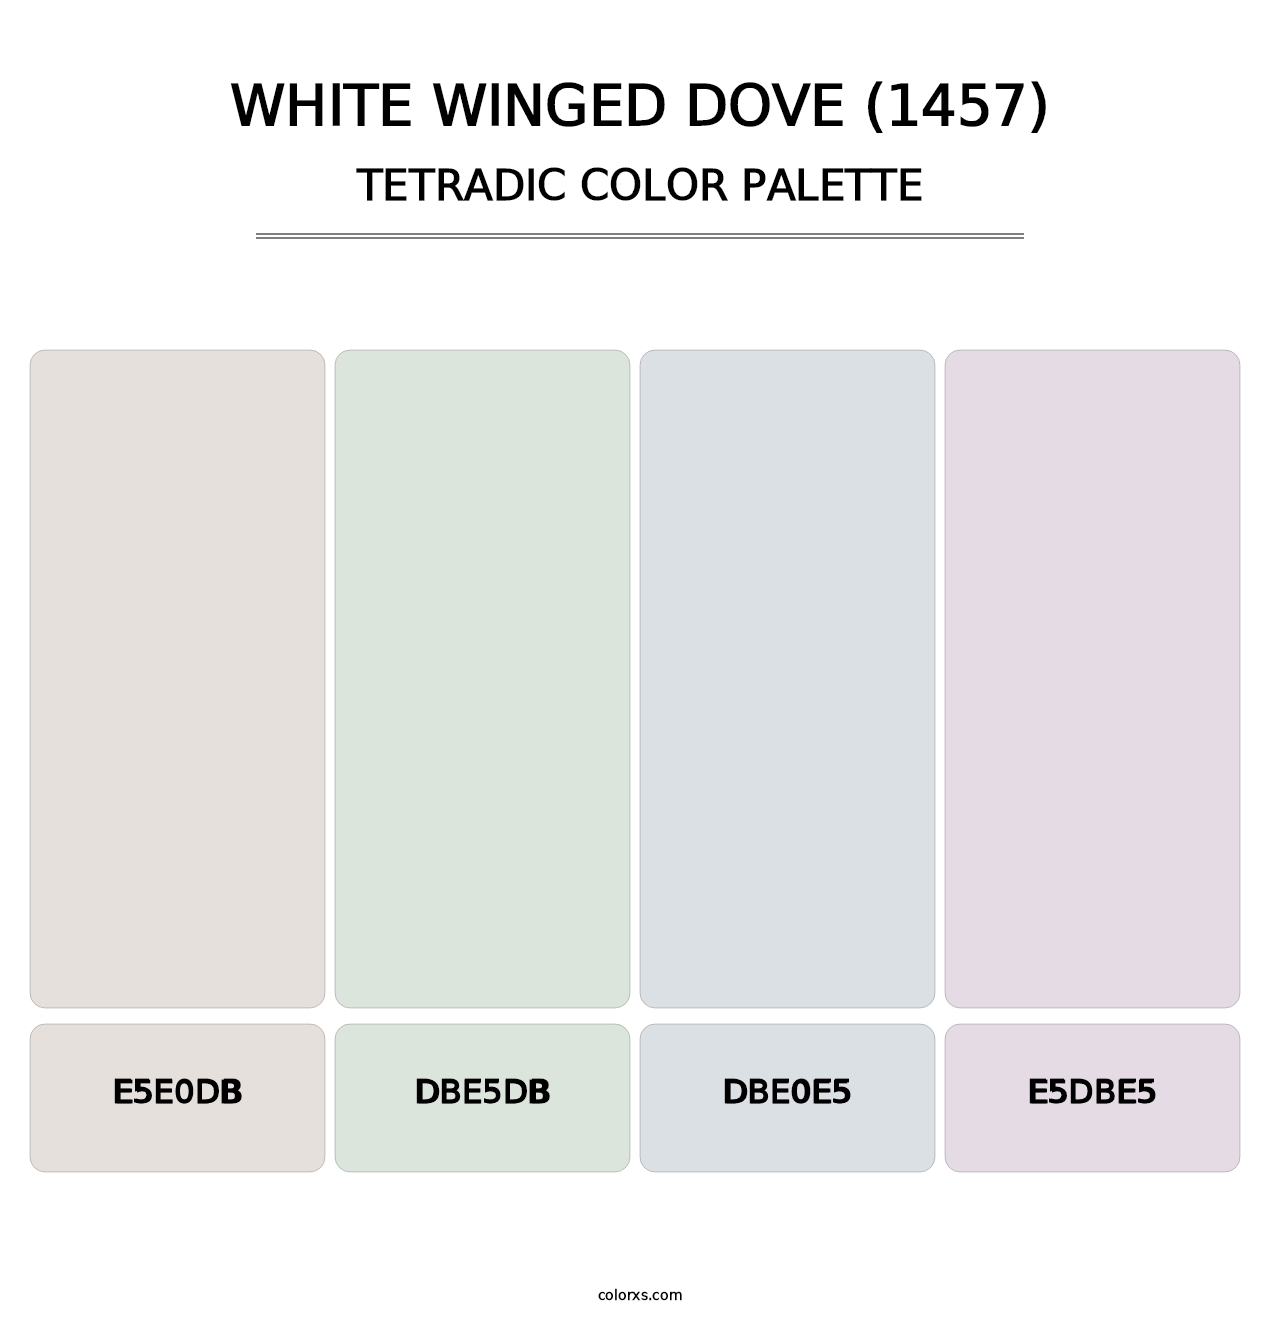 White Winged Dove (1457) - Tetradic Color Palette